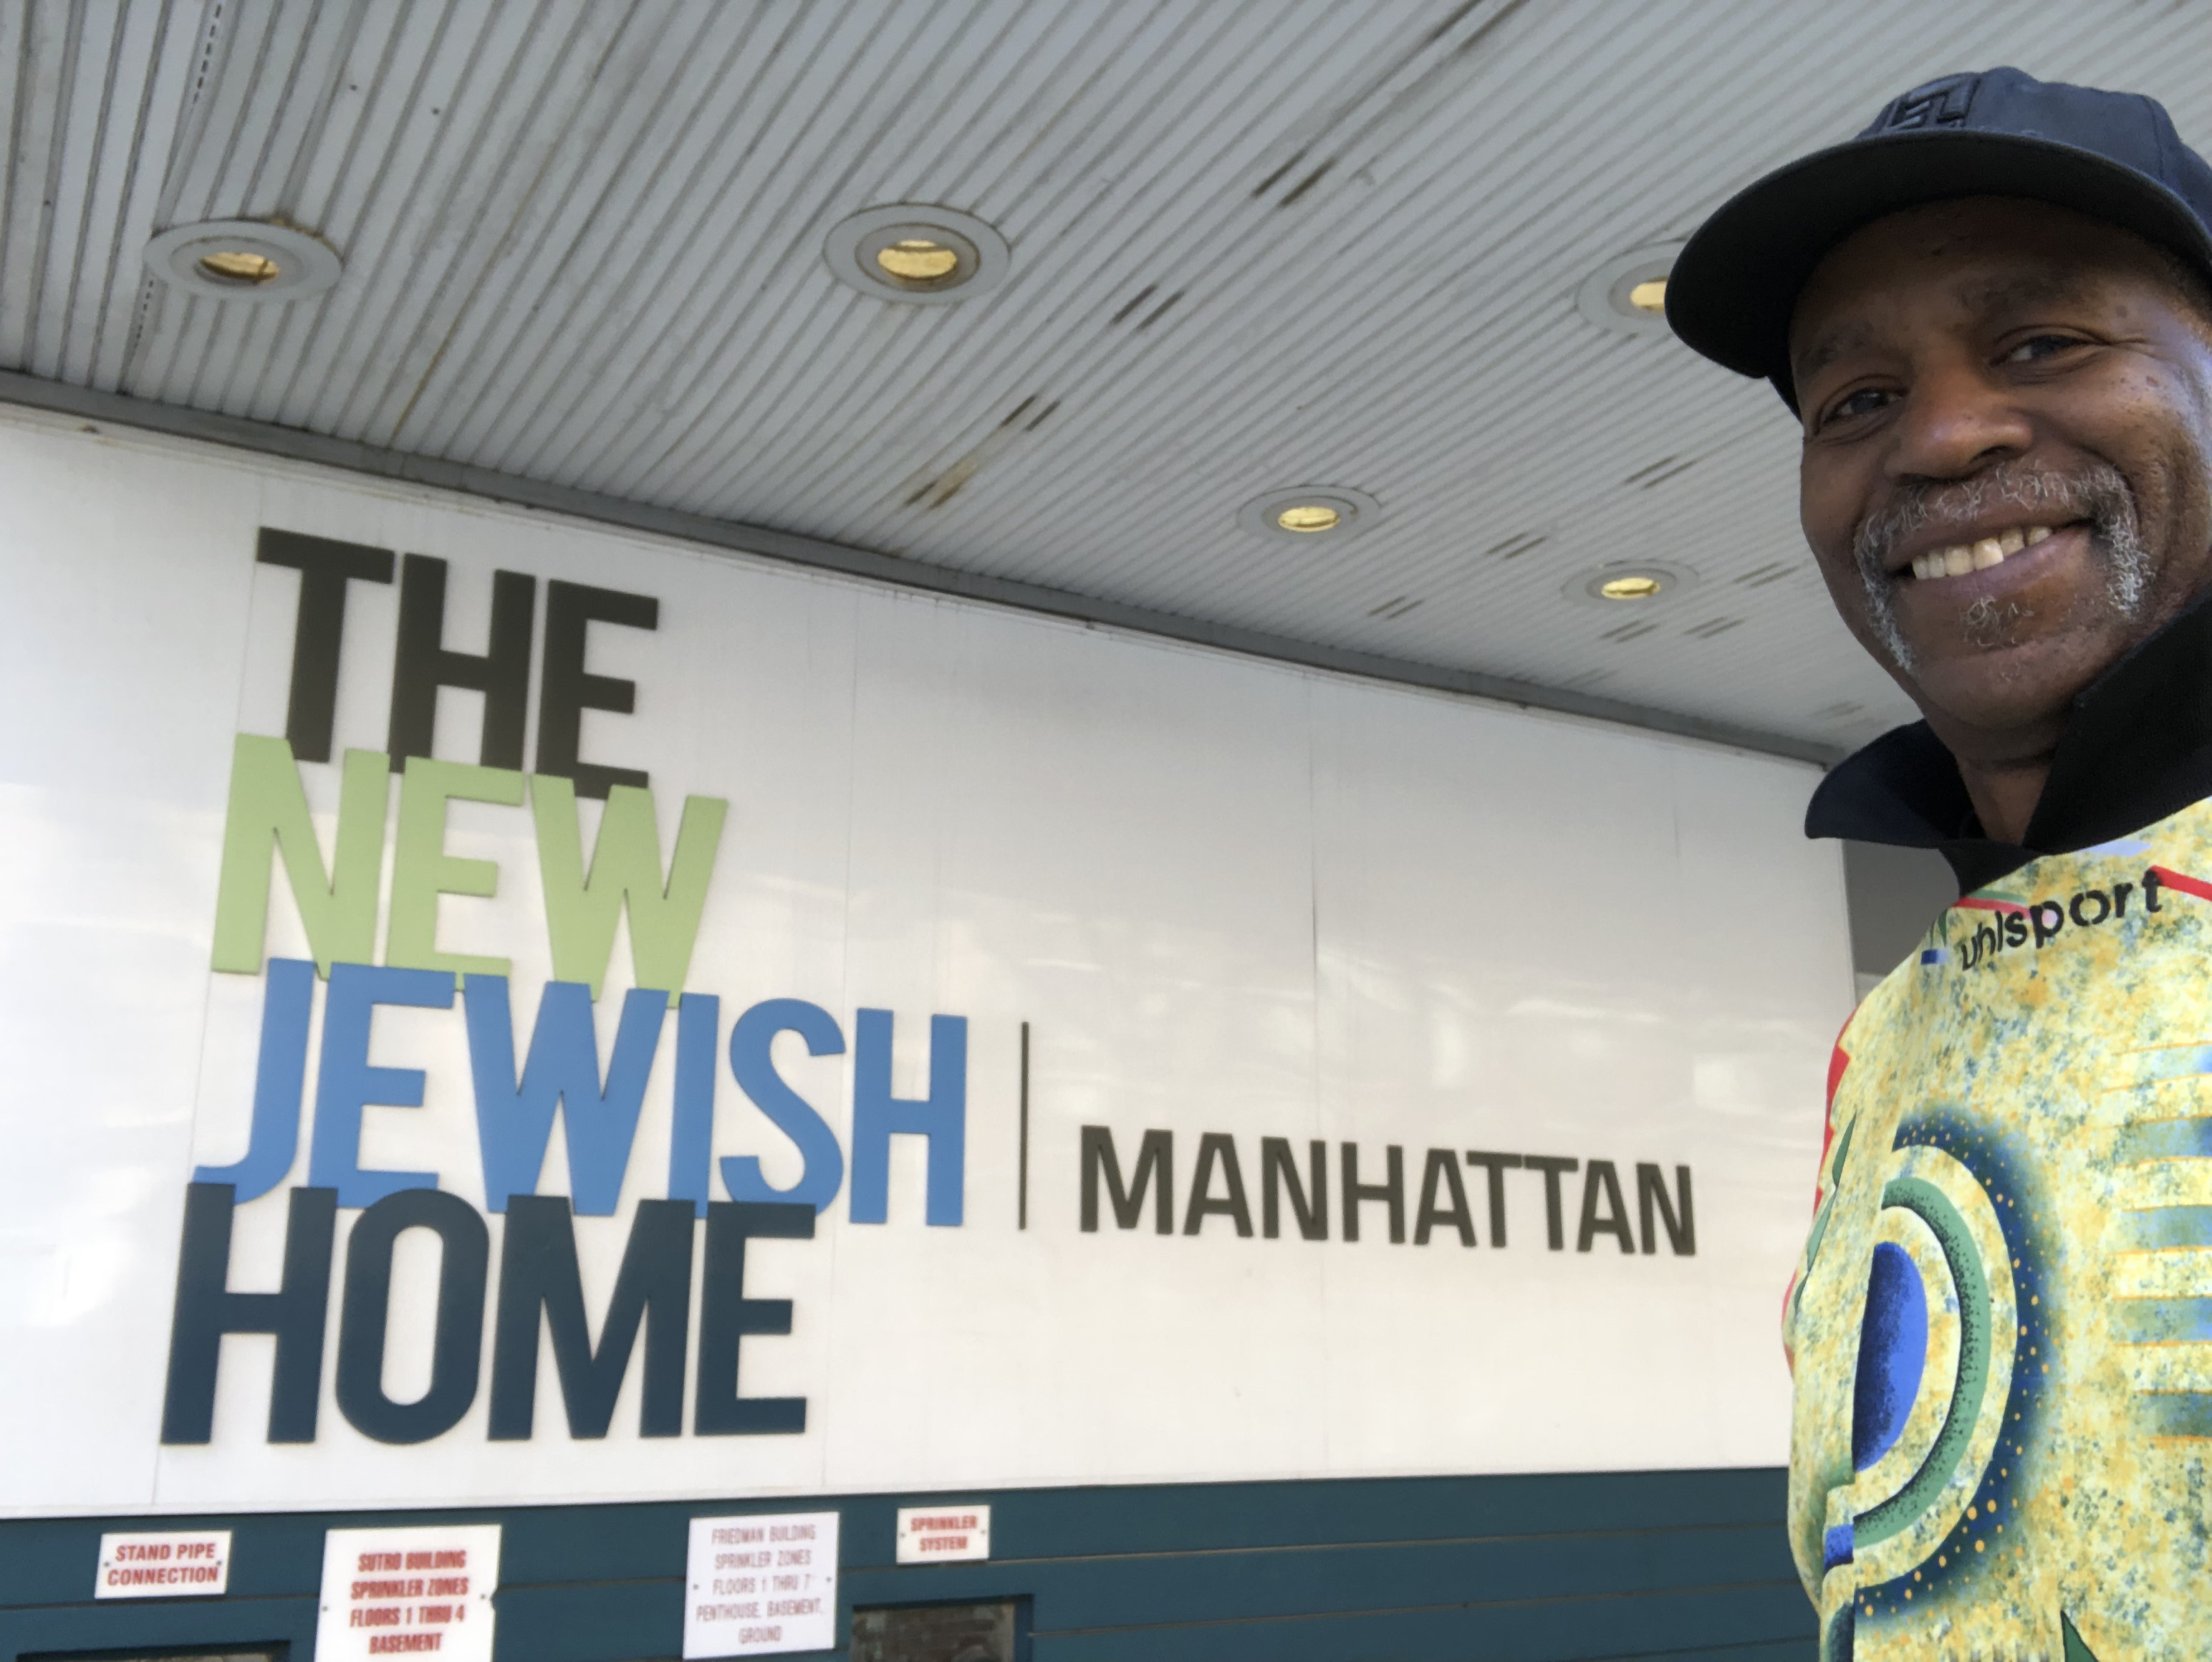 Tommy Campbell at The New Jewish Home MANAHATTAN NYC